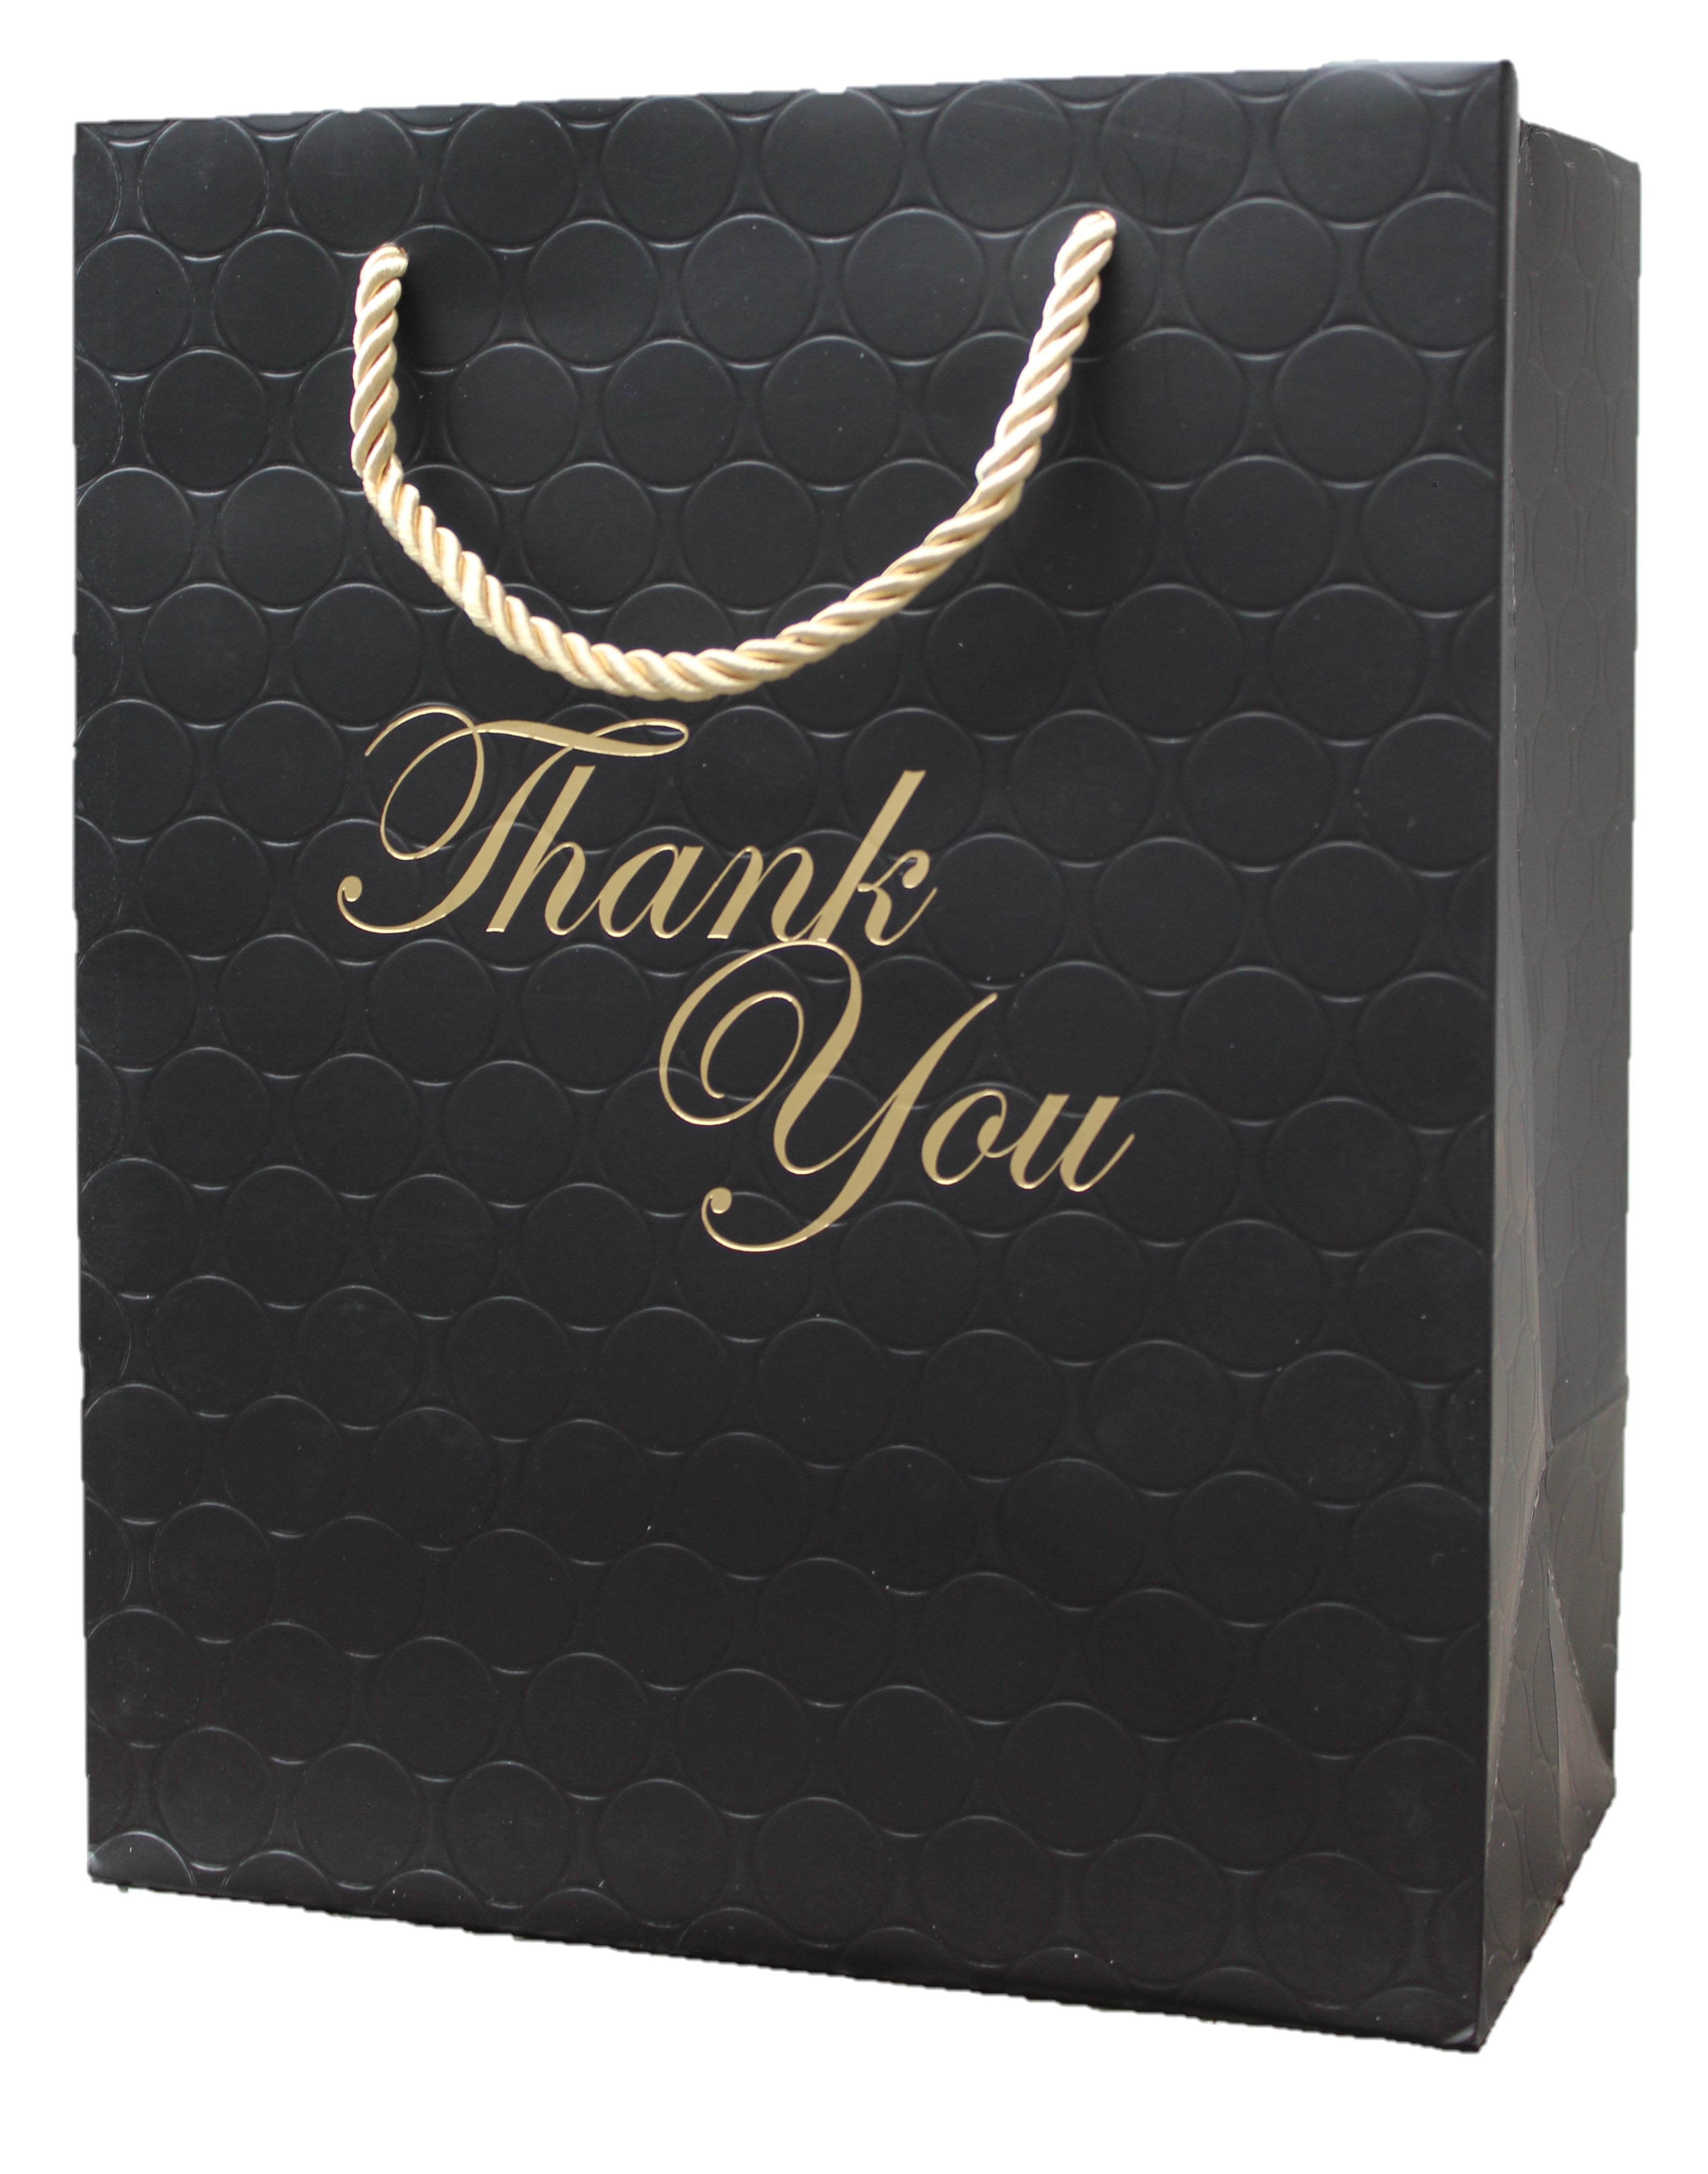 Anavego Set of 6 Personalizable Medium Size 8x10′′ Matte Colored Paper Gift Bags with Handles from Gold Satin. Included Markers & Tissue Paper.